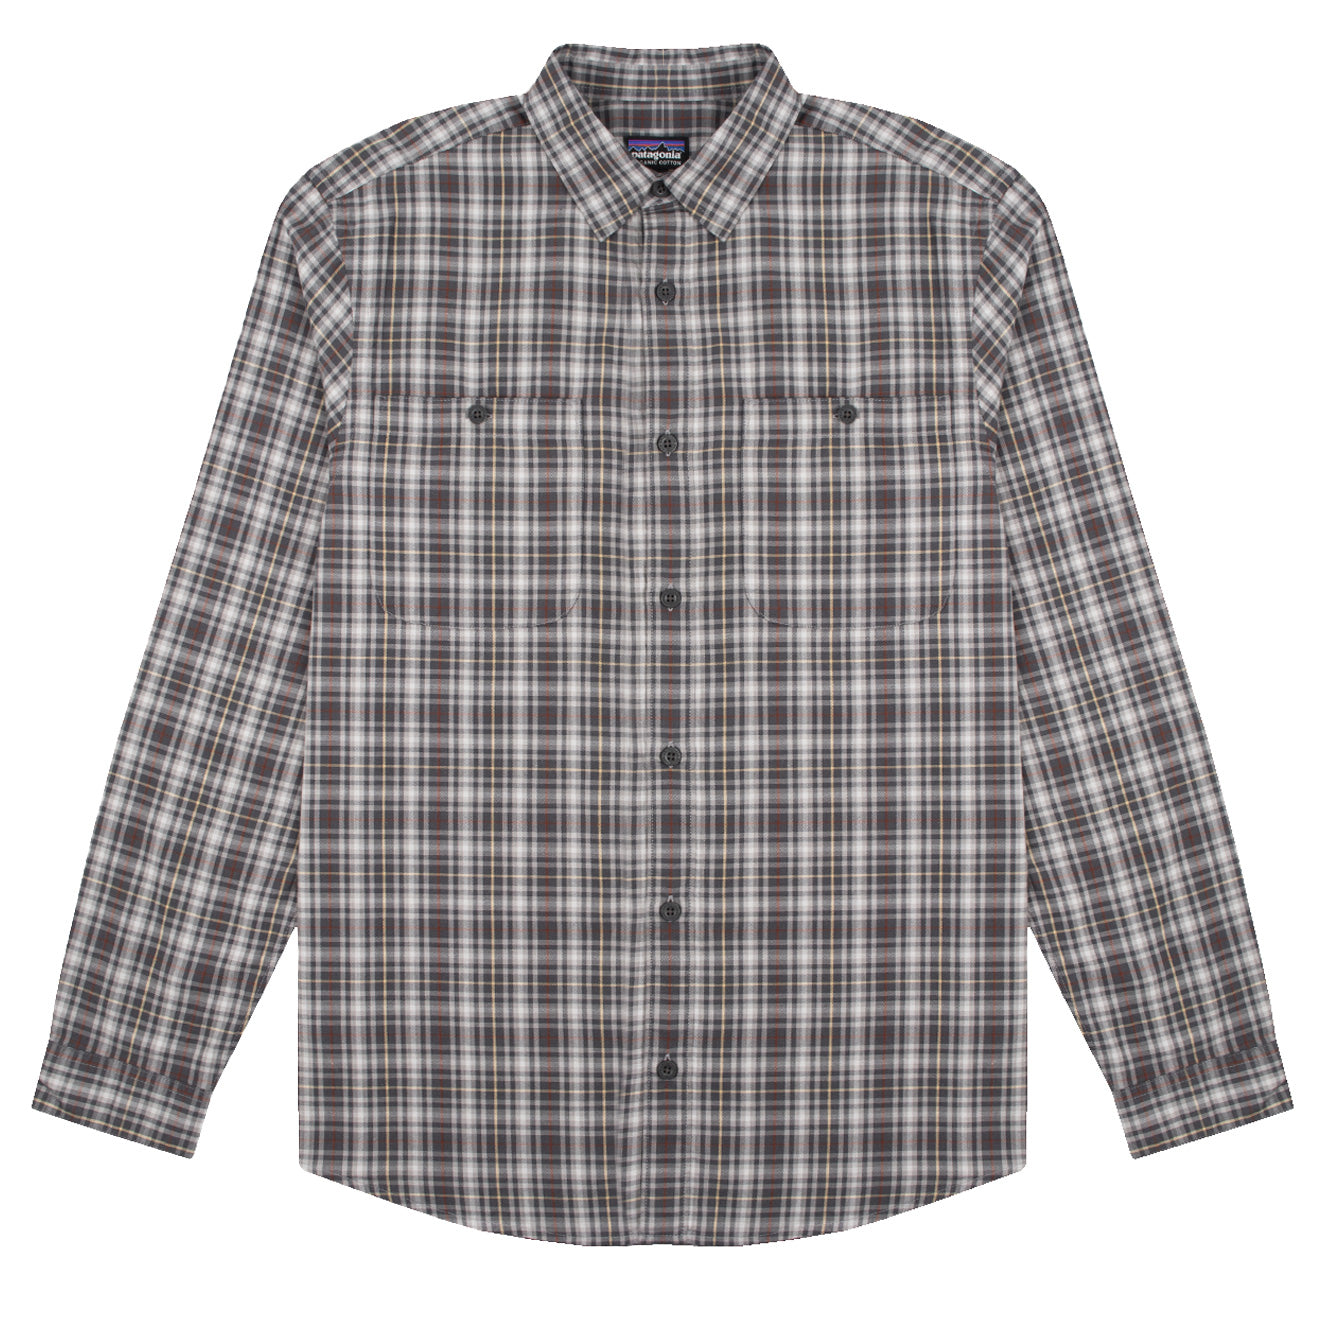 Patagonia L/S Pima Cotton Shirt Fractures / Forge Grey | The Sporting Lodge